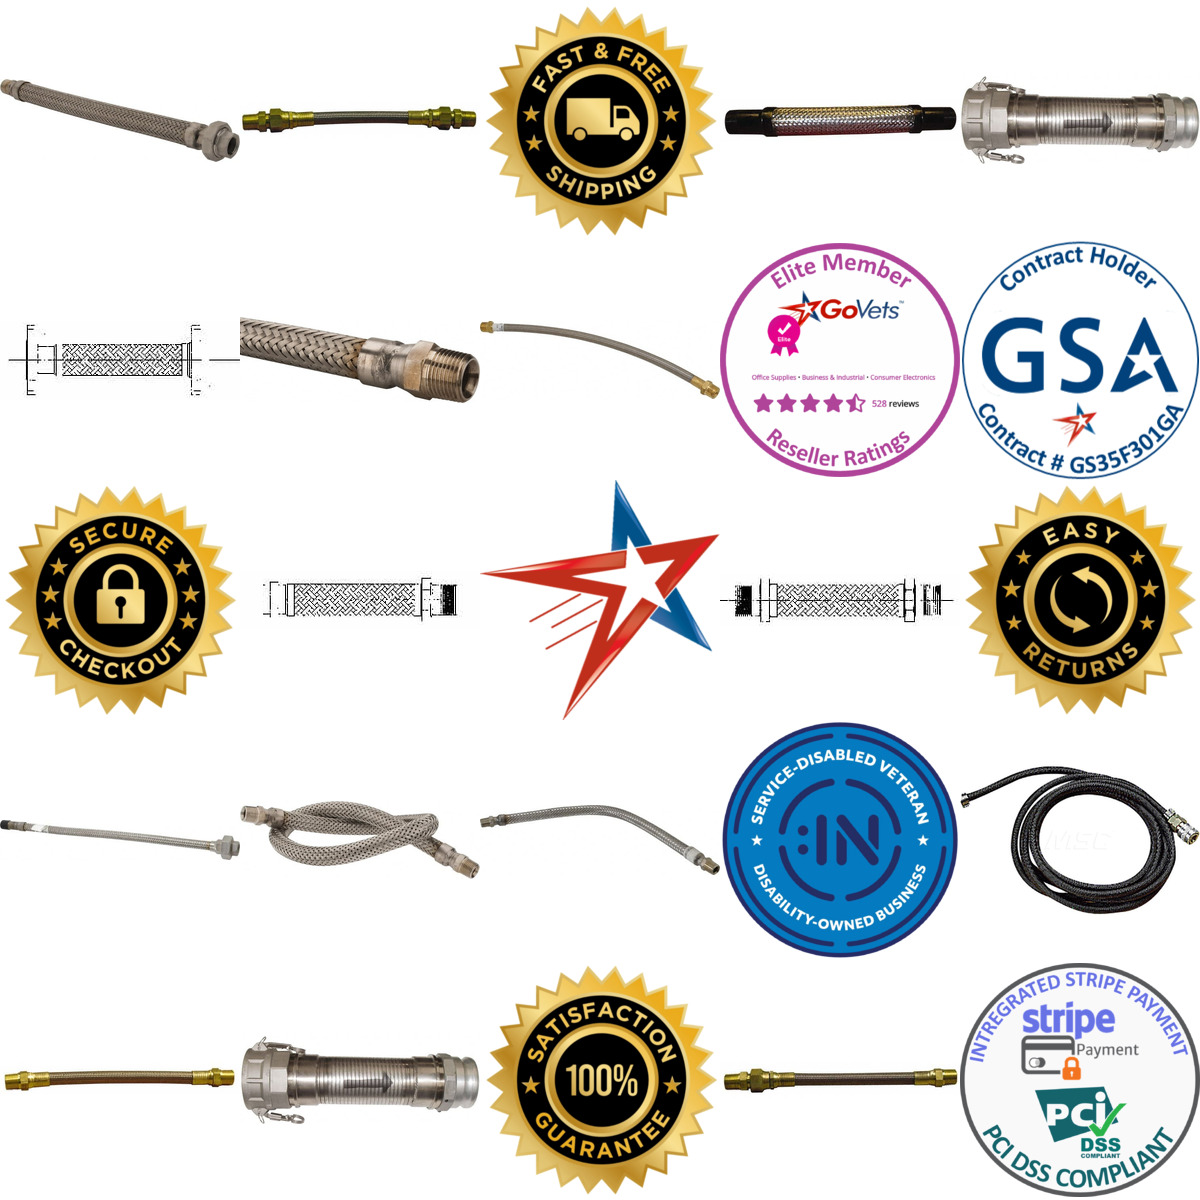 A selection of Flexible Metal Hose Assemblies products on GoVets